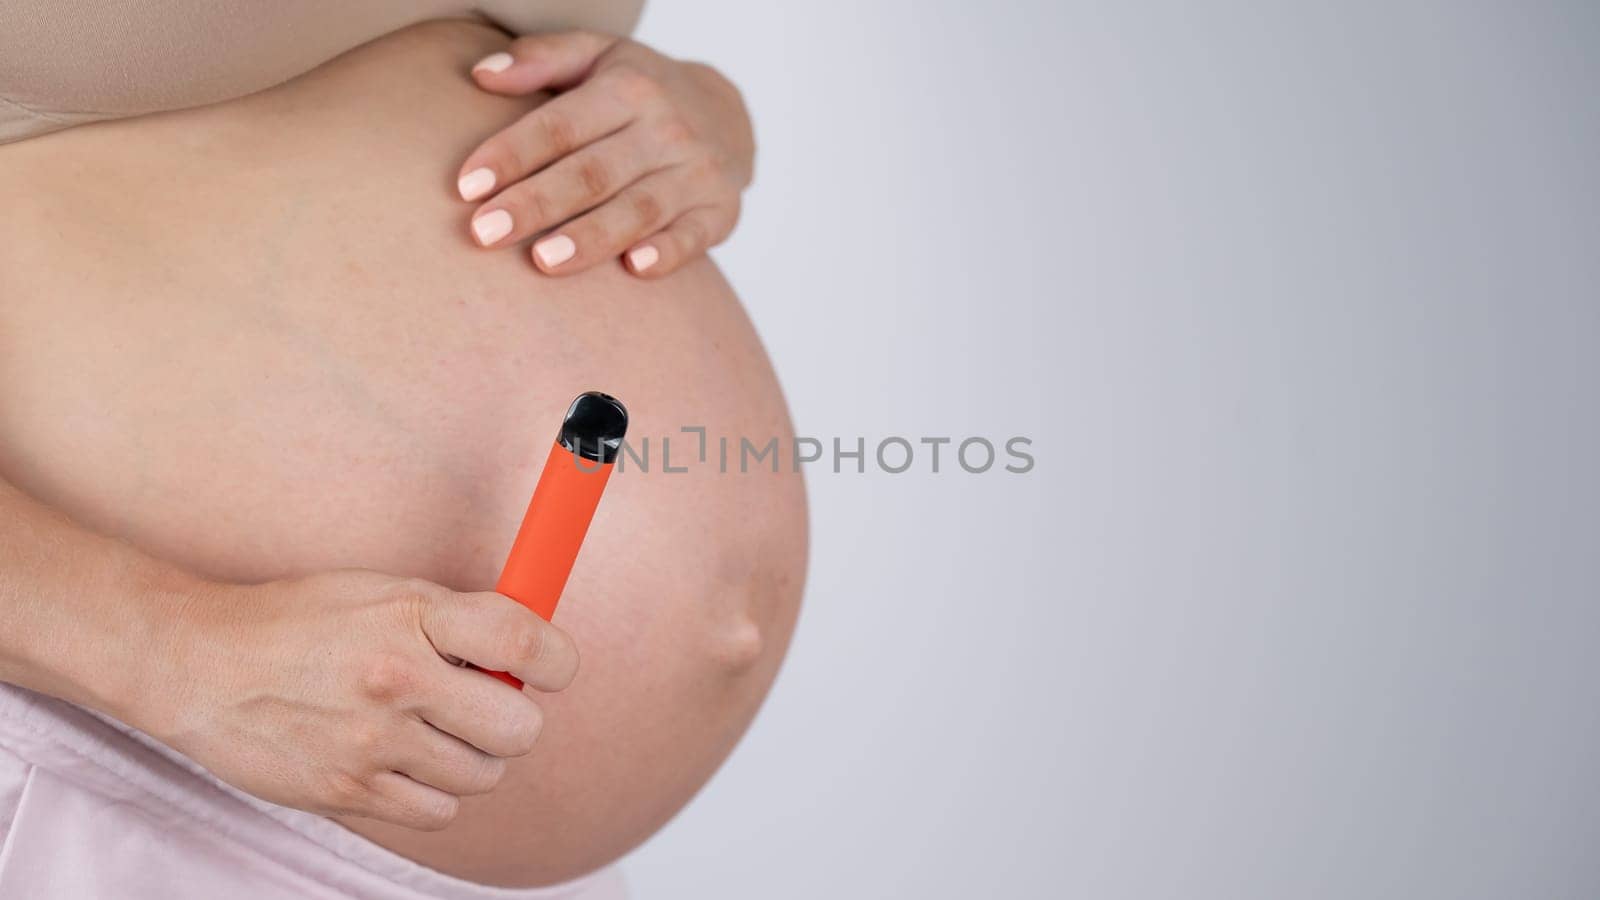 A pregnant woman smokes a vape. A girl holds an electronic cigarette against the background of her bare tummy. Copy space